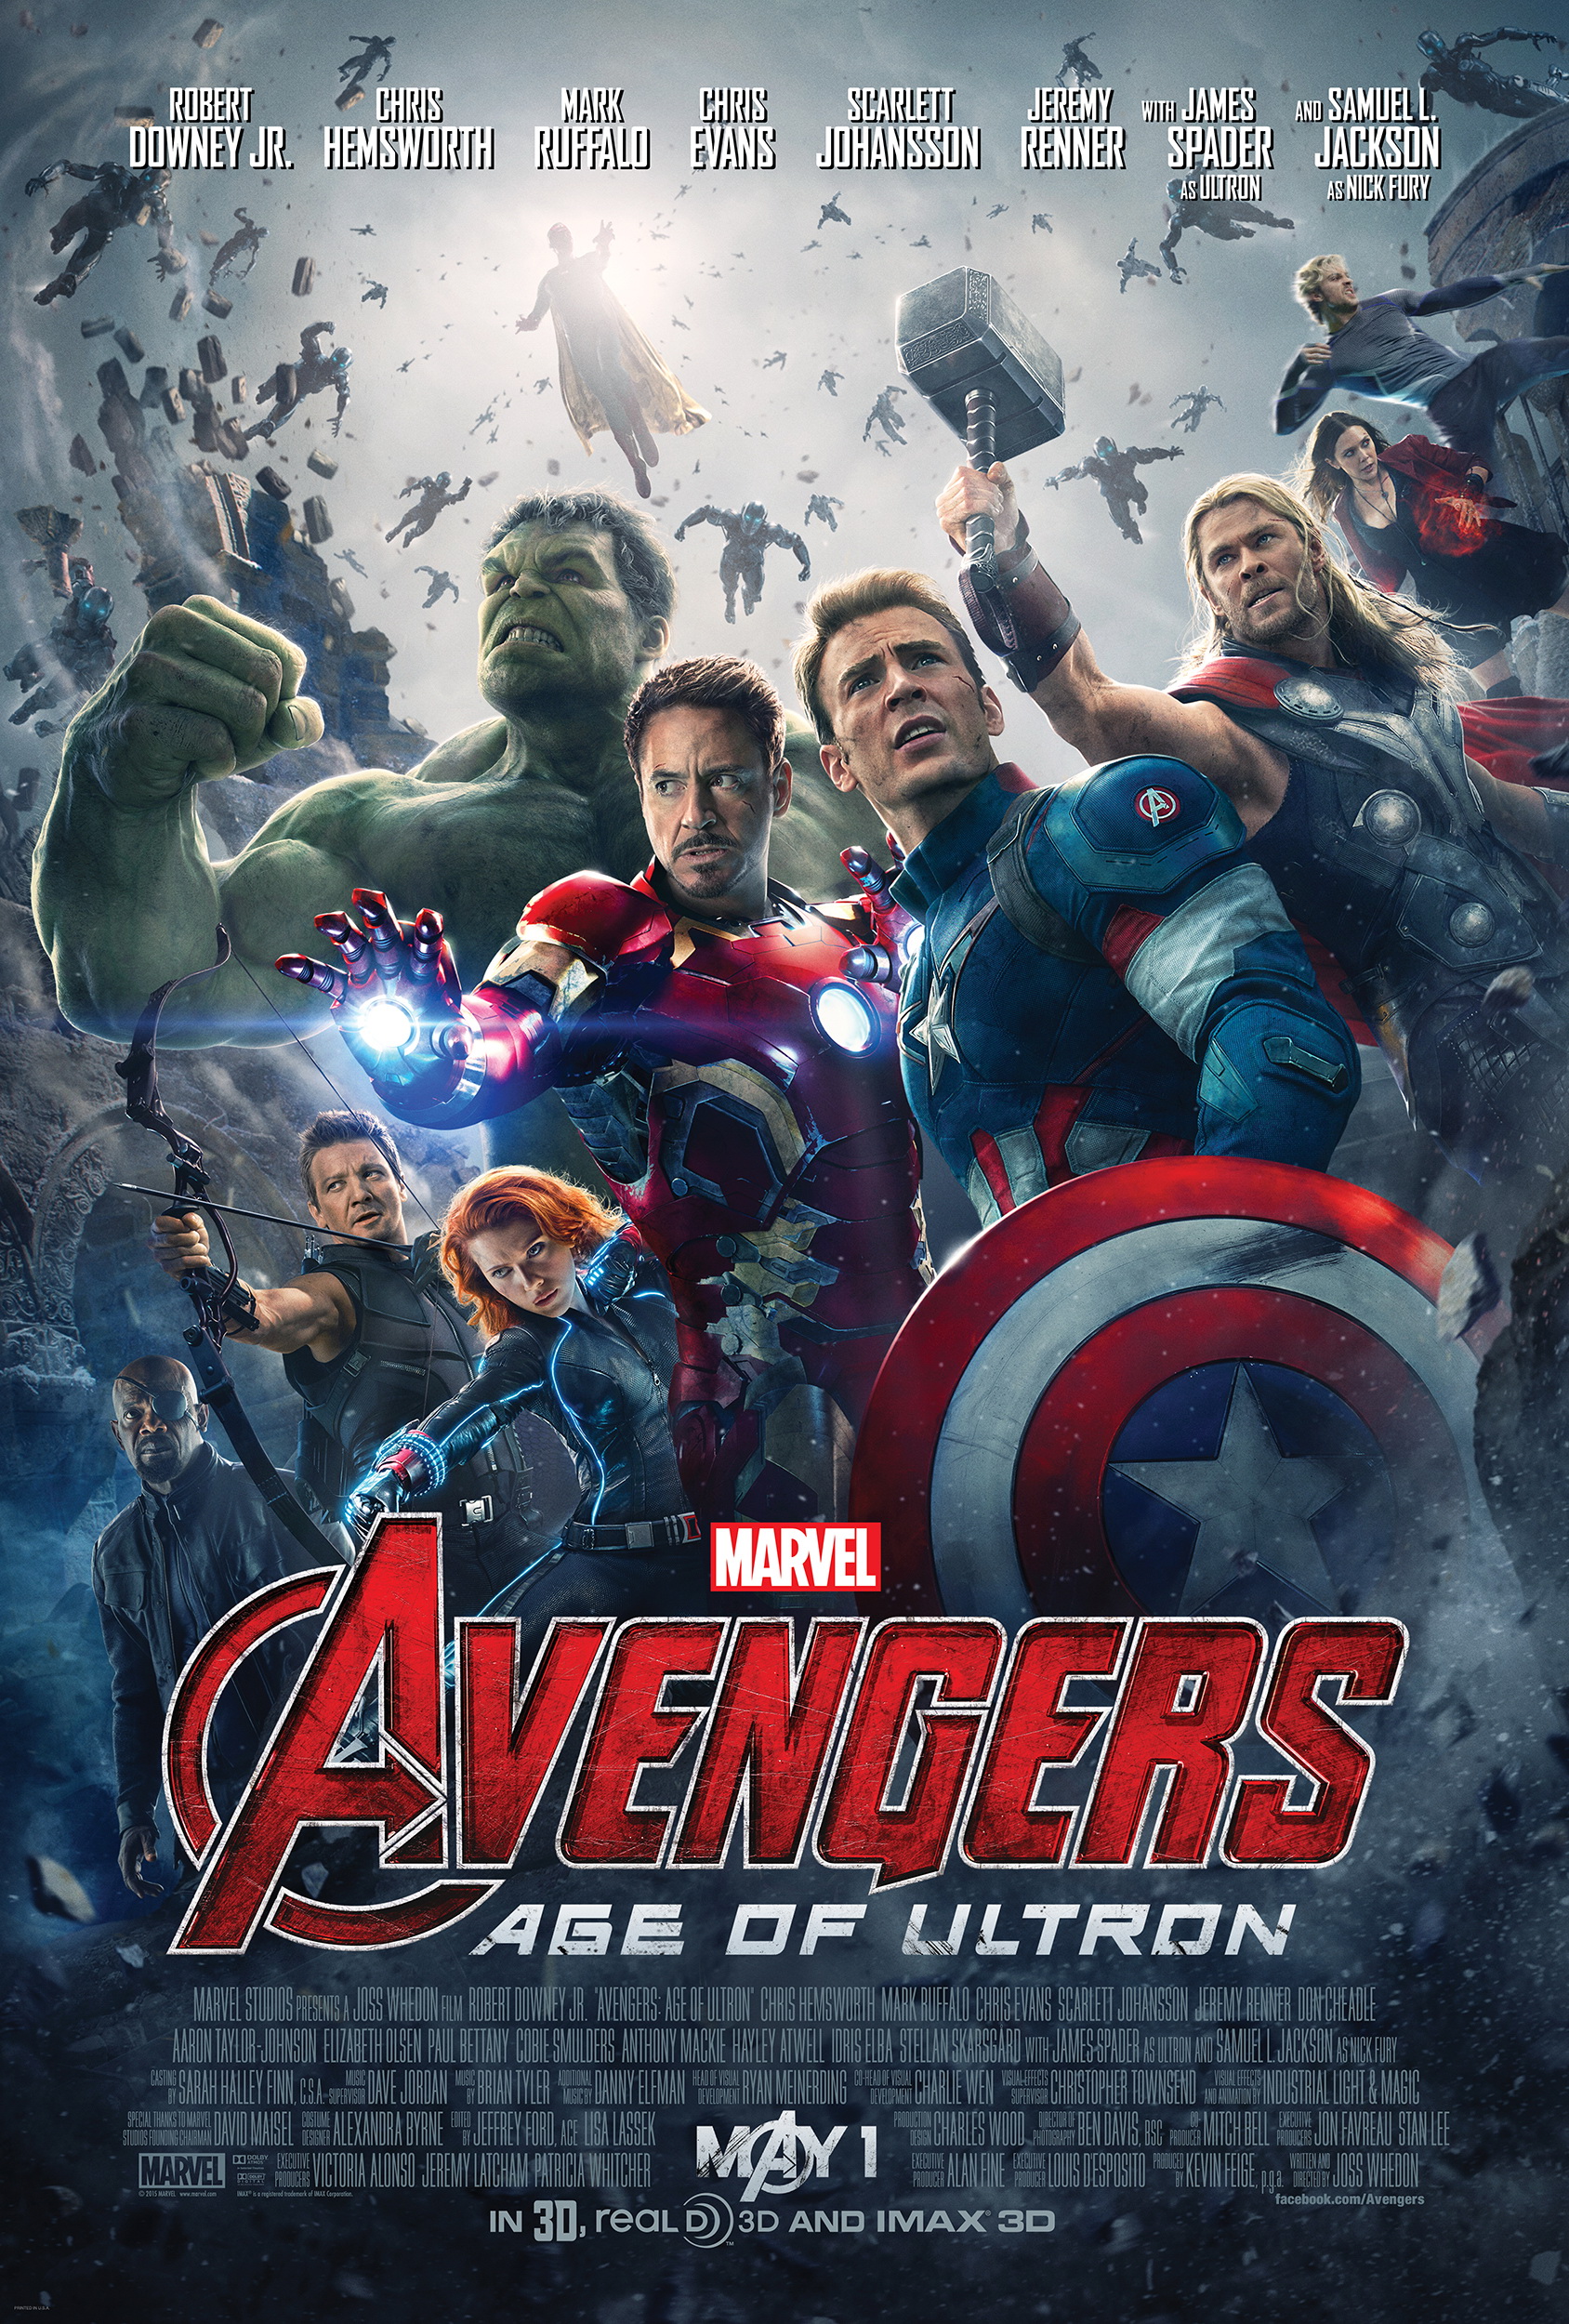 'Avengers: Age of Ultron' (2015) theatrical poster